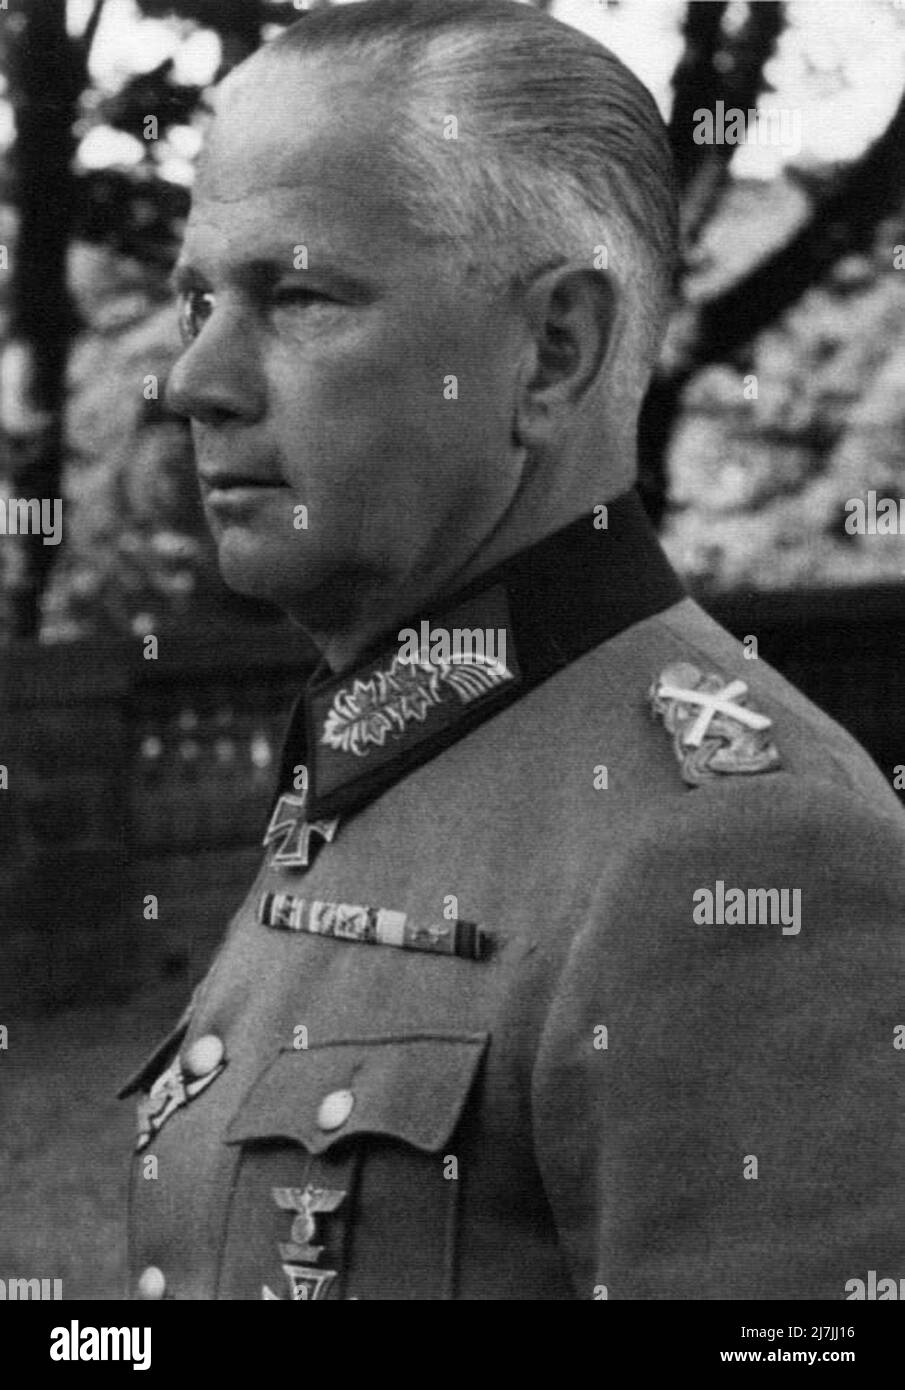 Wehrmacht leader Walter von Reichenau. During WW2 he commanded the 6thArmy in Europe and as part of Army Group South during Operation Barbarossa, the nazi invasion of the USSR Stock Photo